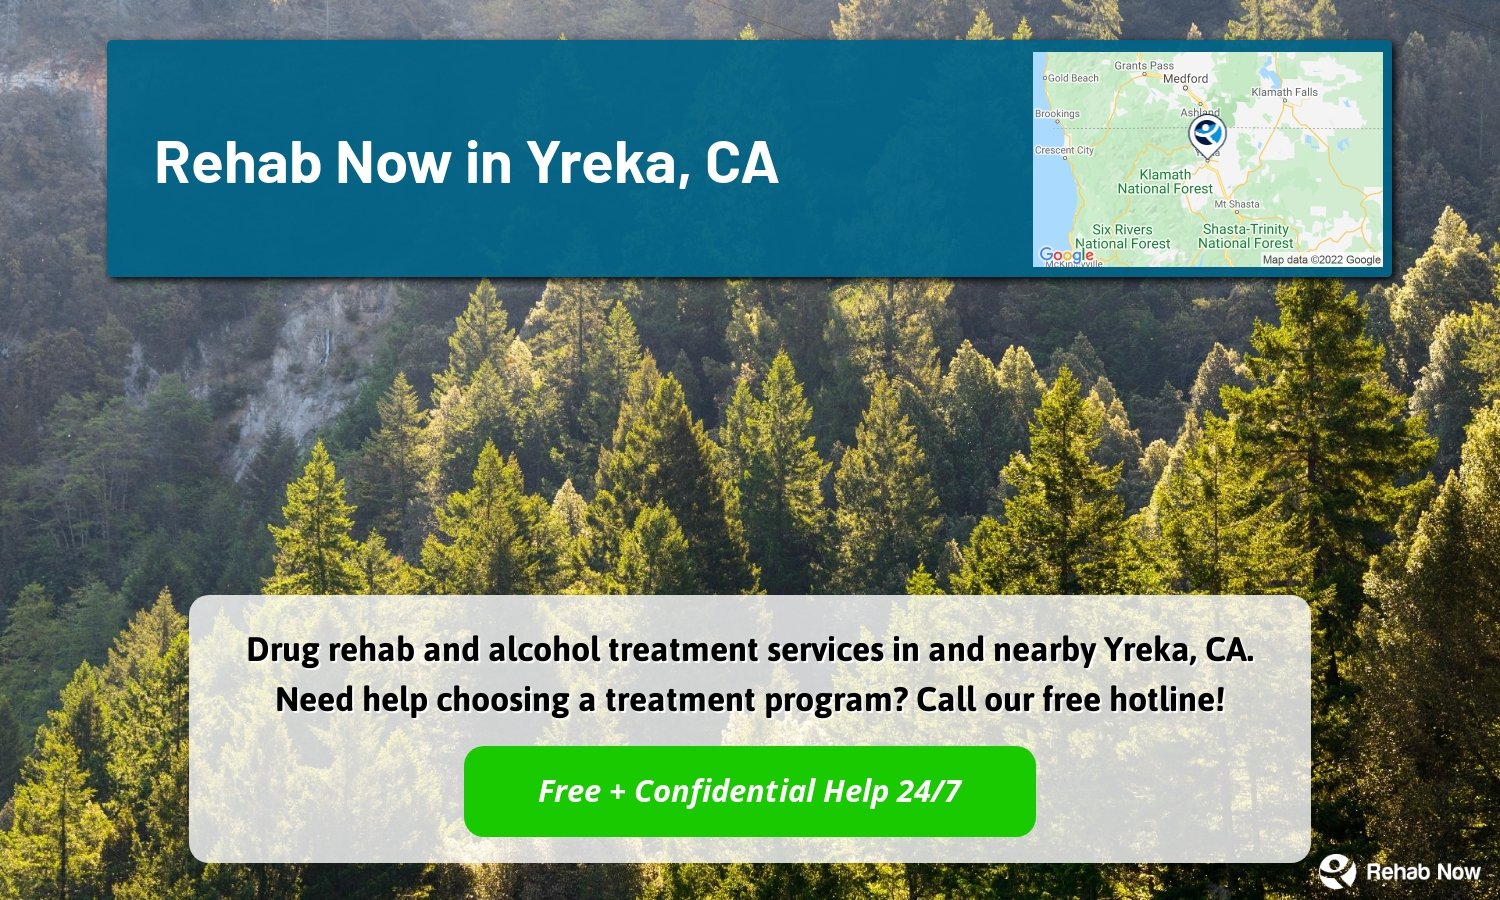 Drug rehab and alcohol treatment services in and nearby Yreka, CA. Need help choosing a treatment program? Call our free hotline!